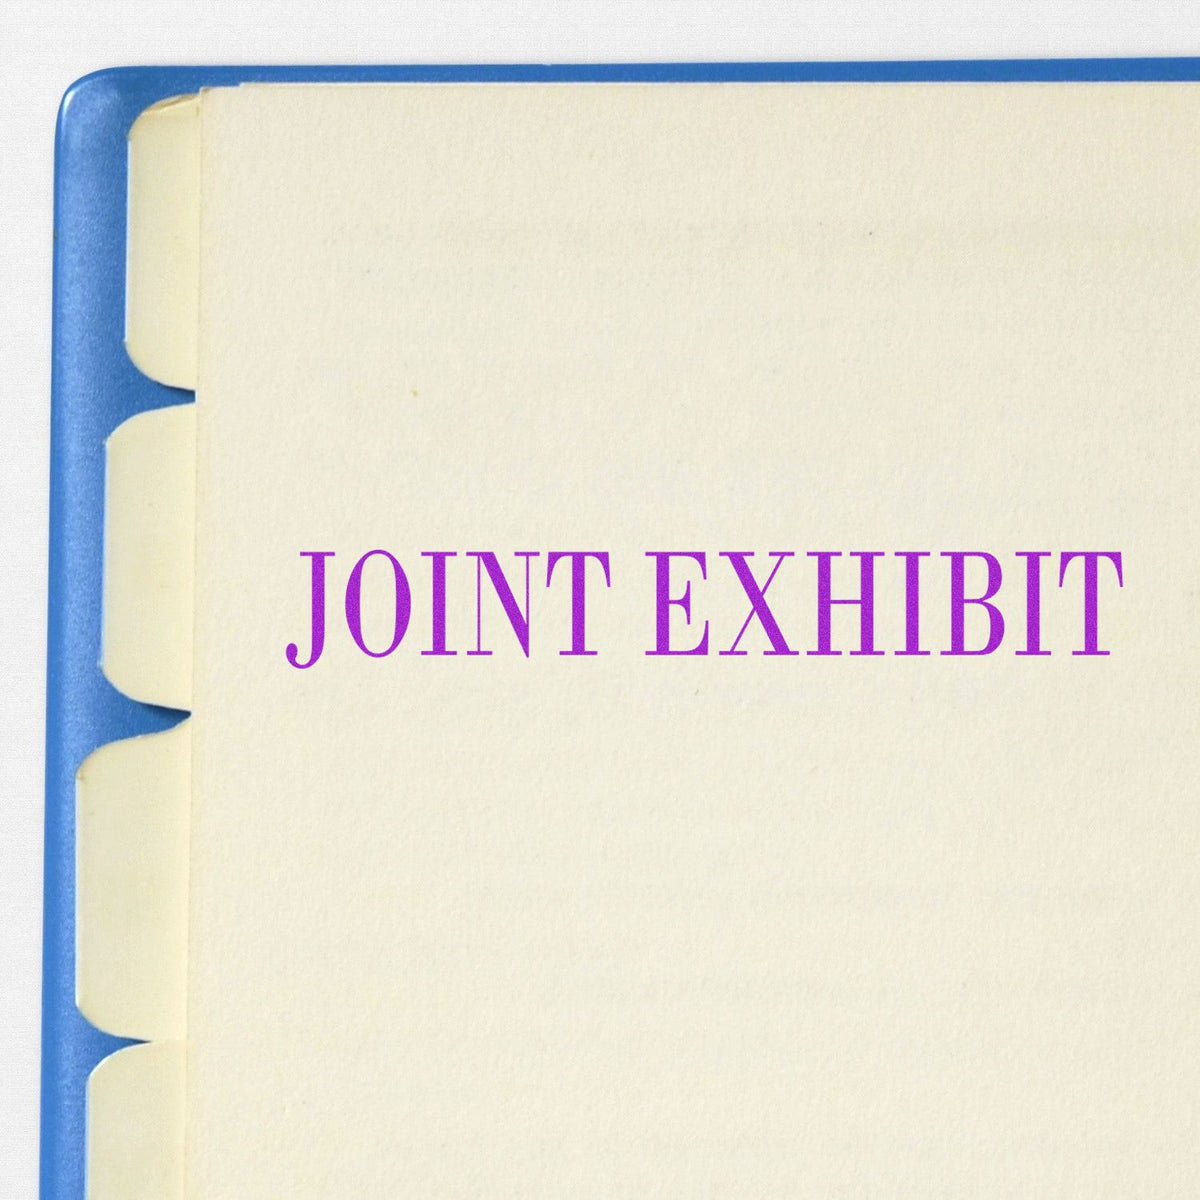 Joint Exhibit Rubber Stamp In Use